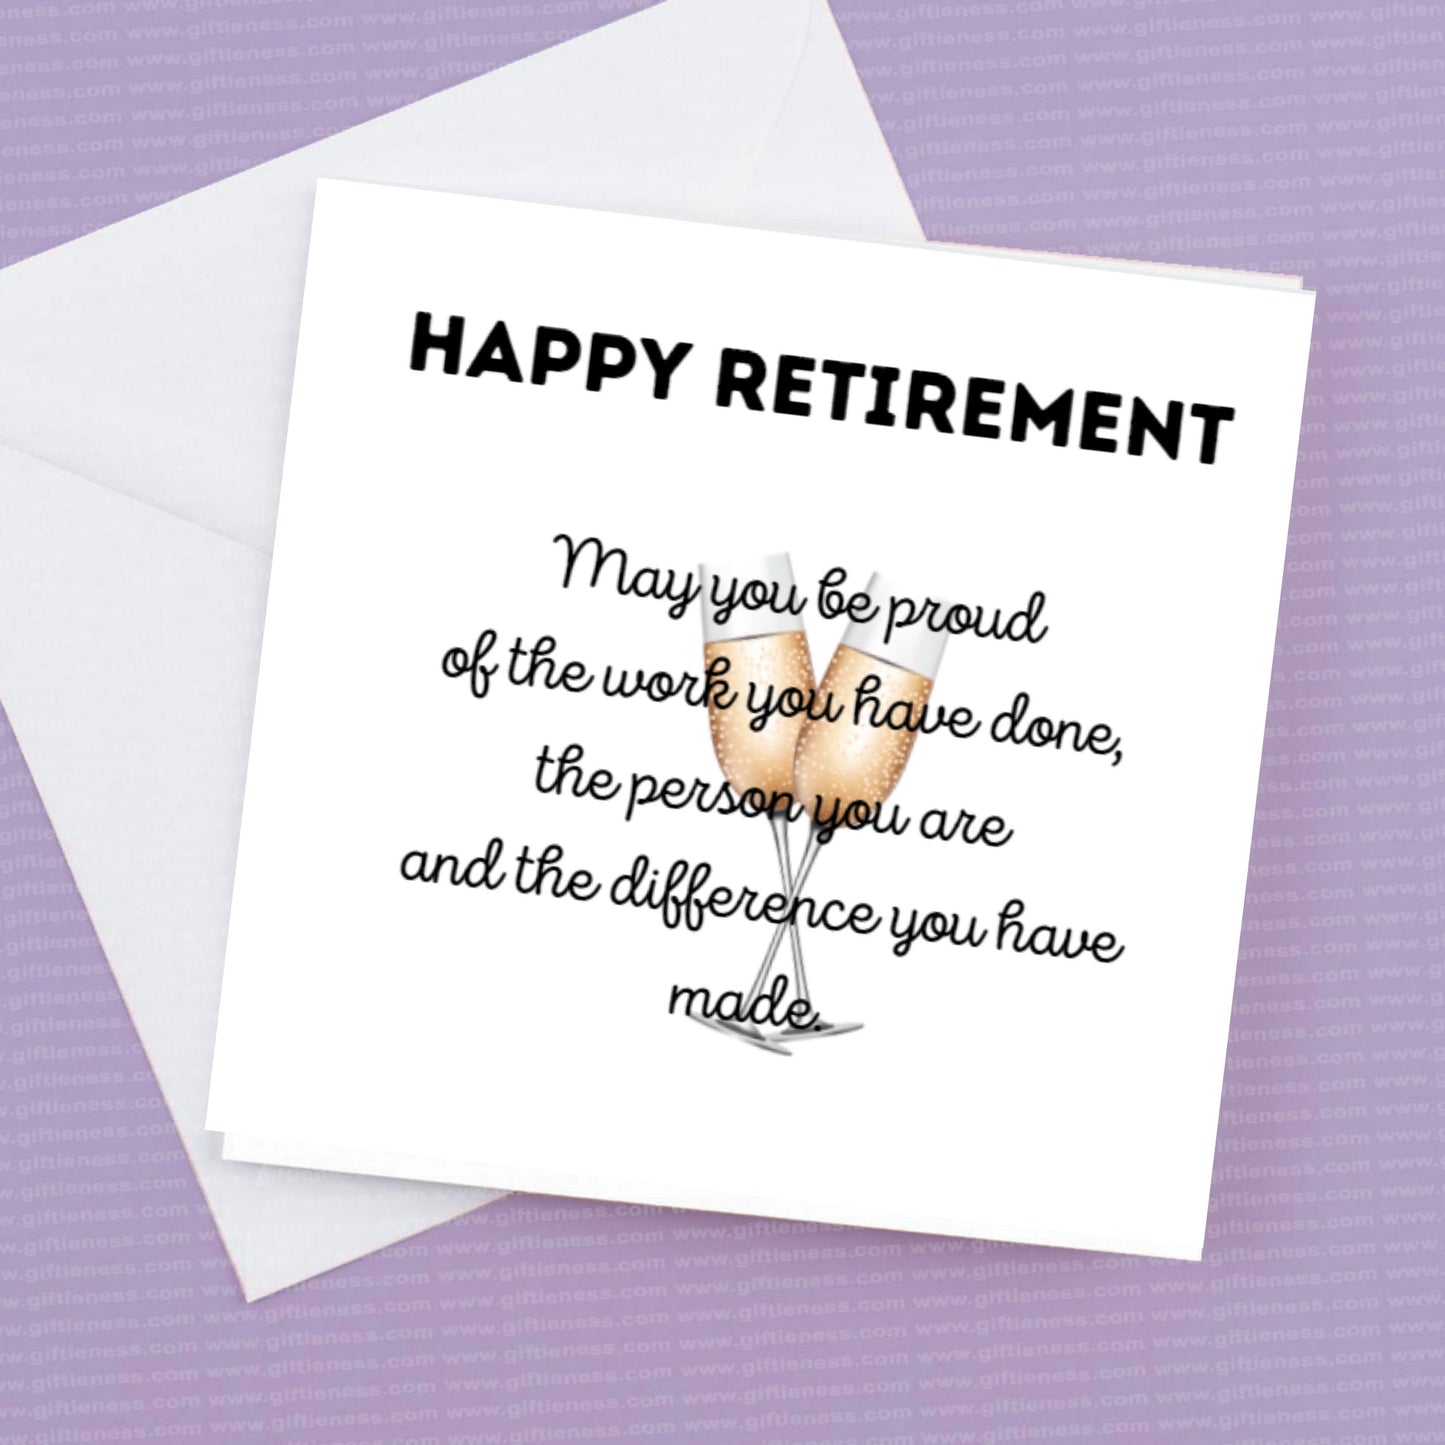 Happy Retirement Card, May you be proud of the work you have done